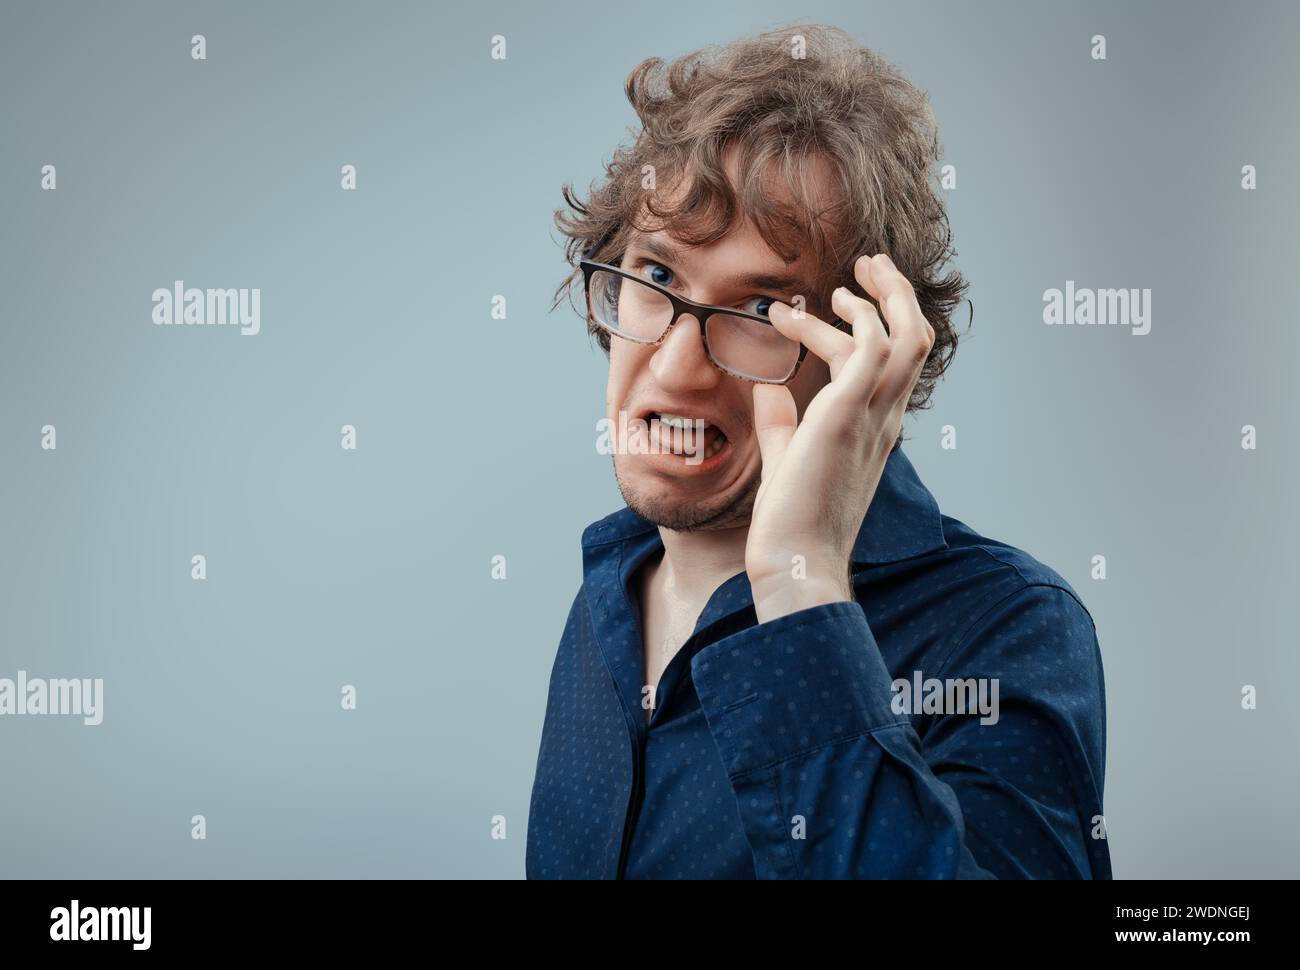 Man with glasses grimaces, a look of disgust manifesting in response to an unpleasant situation Stock Photo